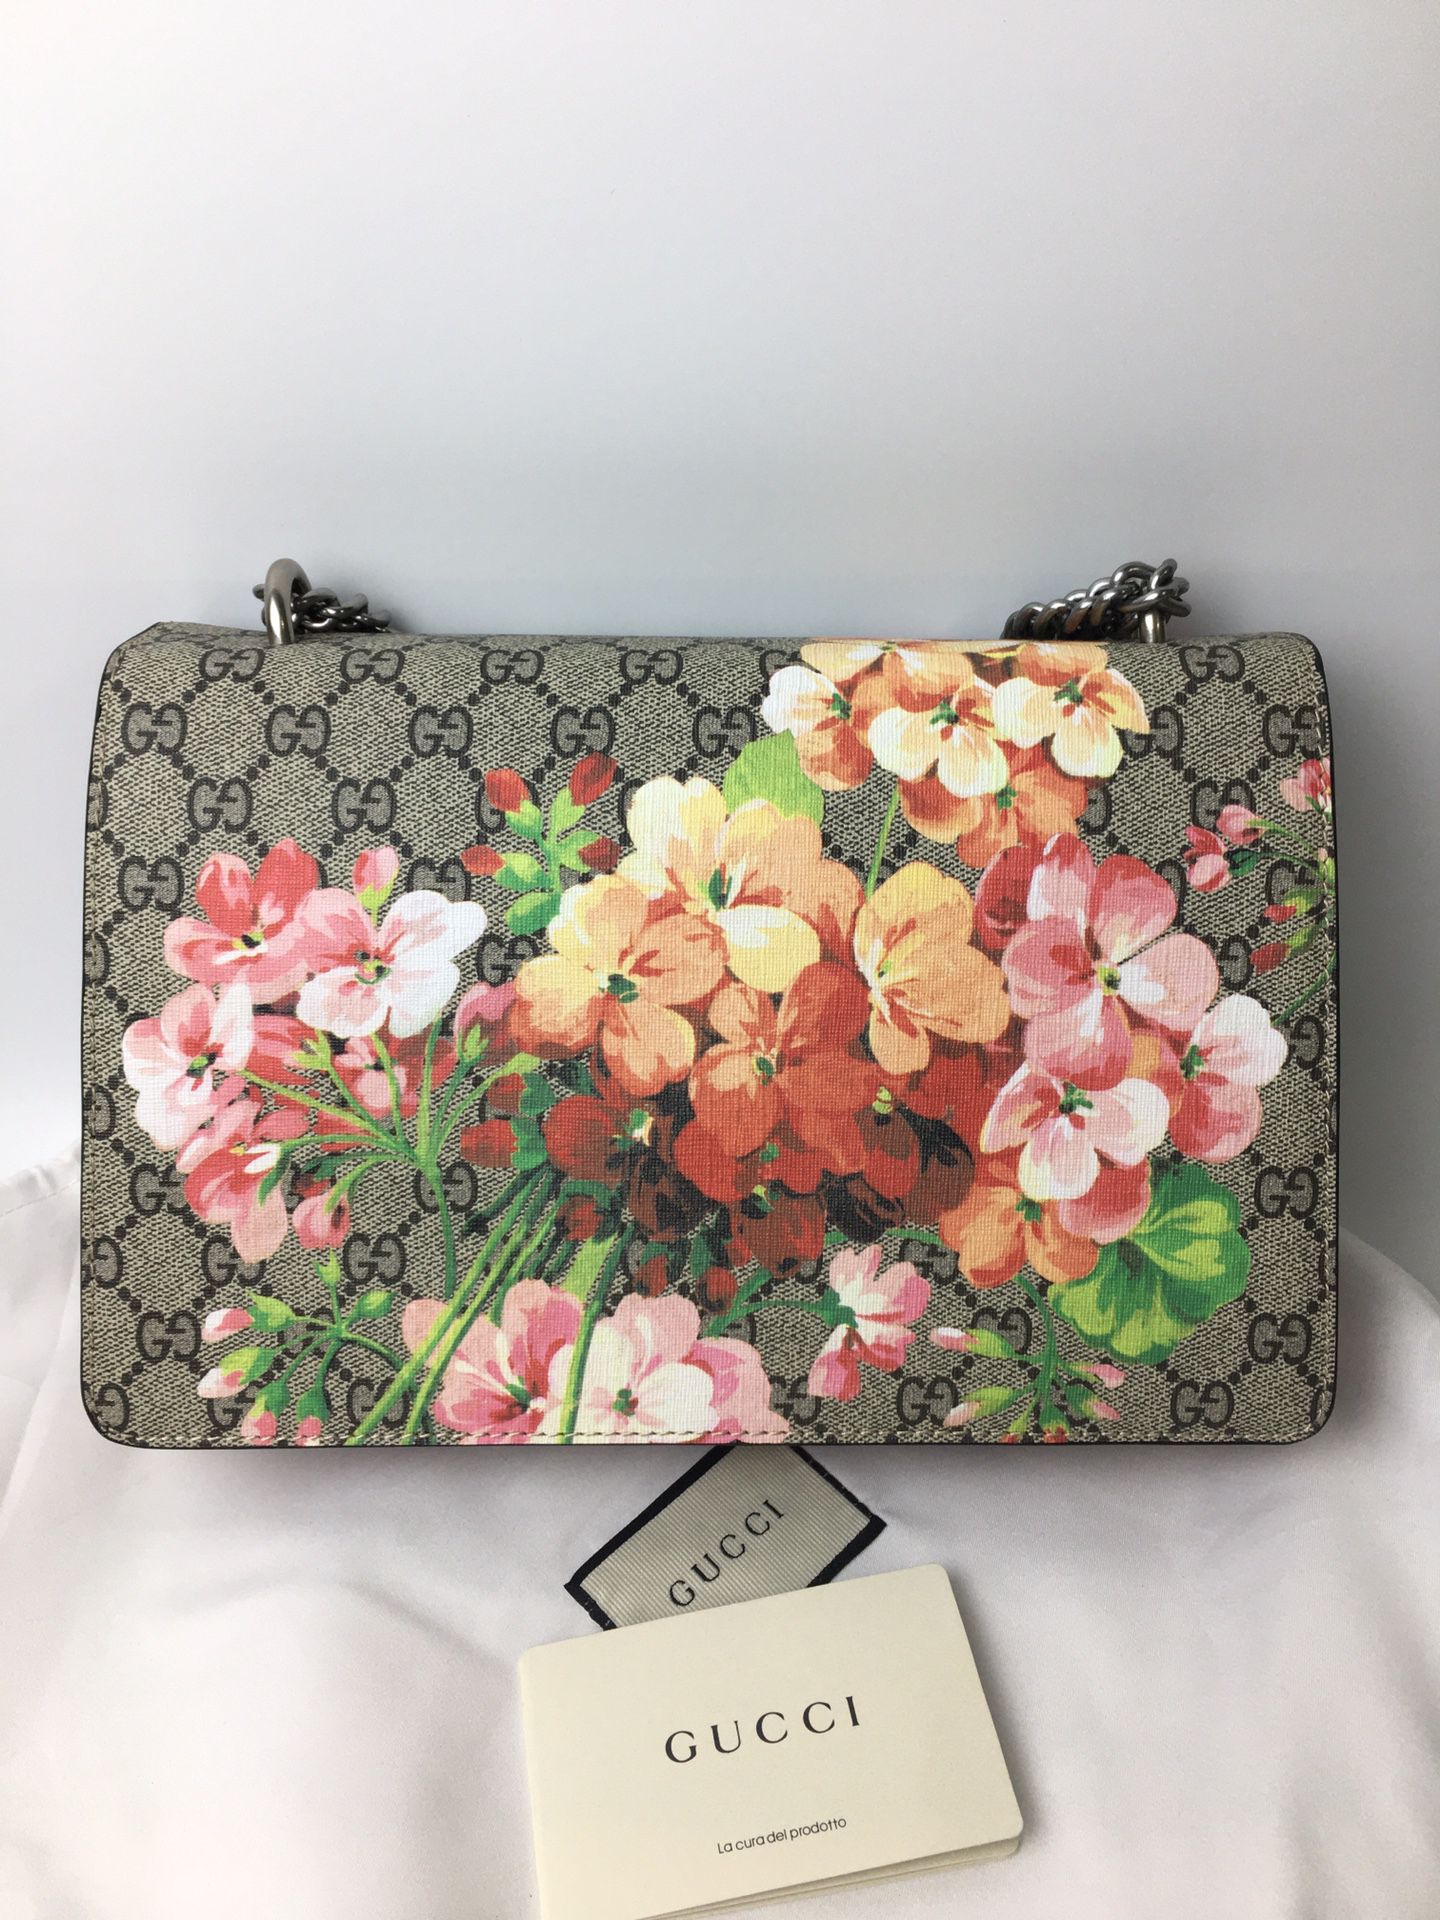 Gucci Blooms Floral Coin Case Key